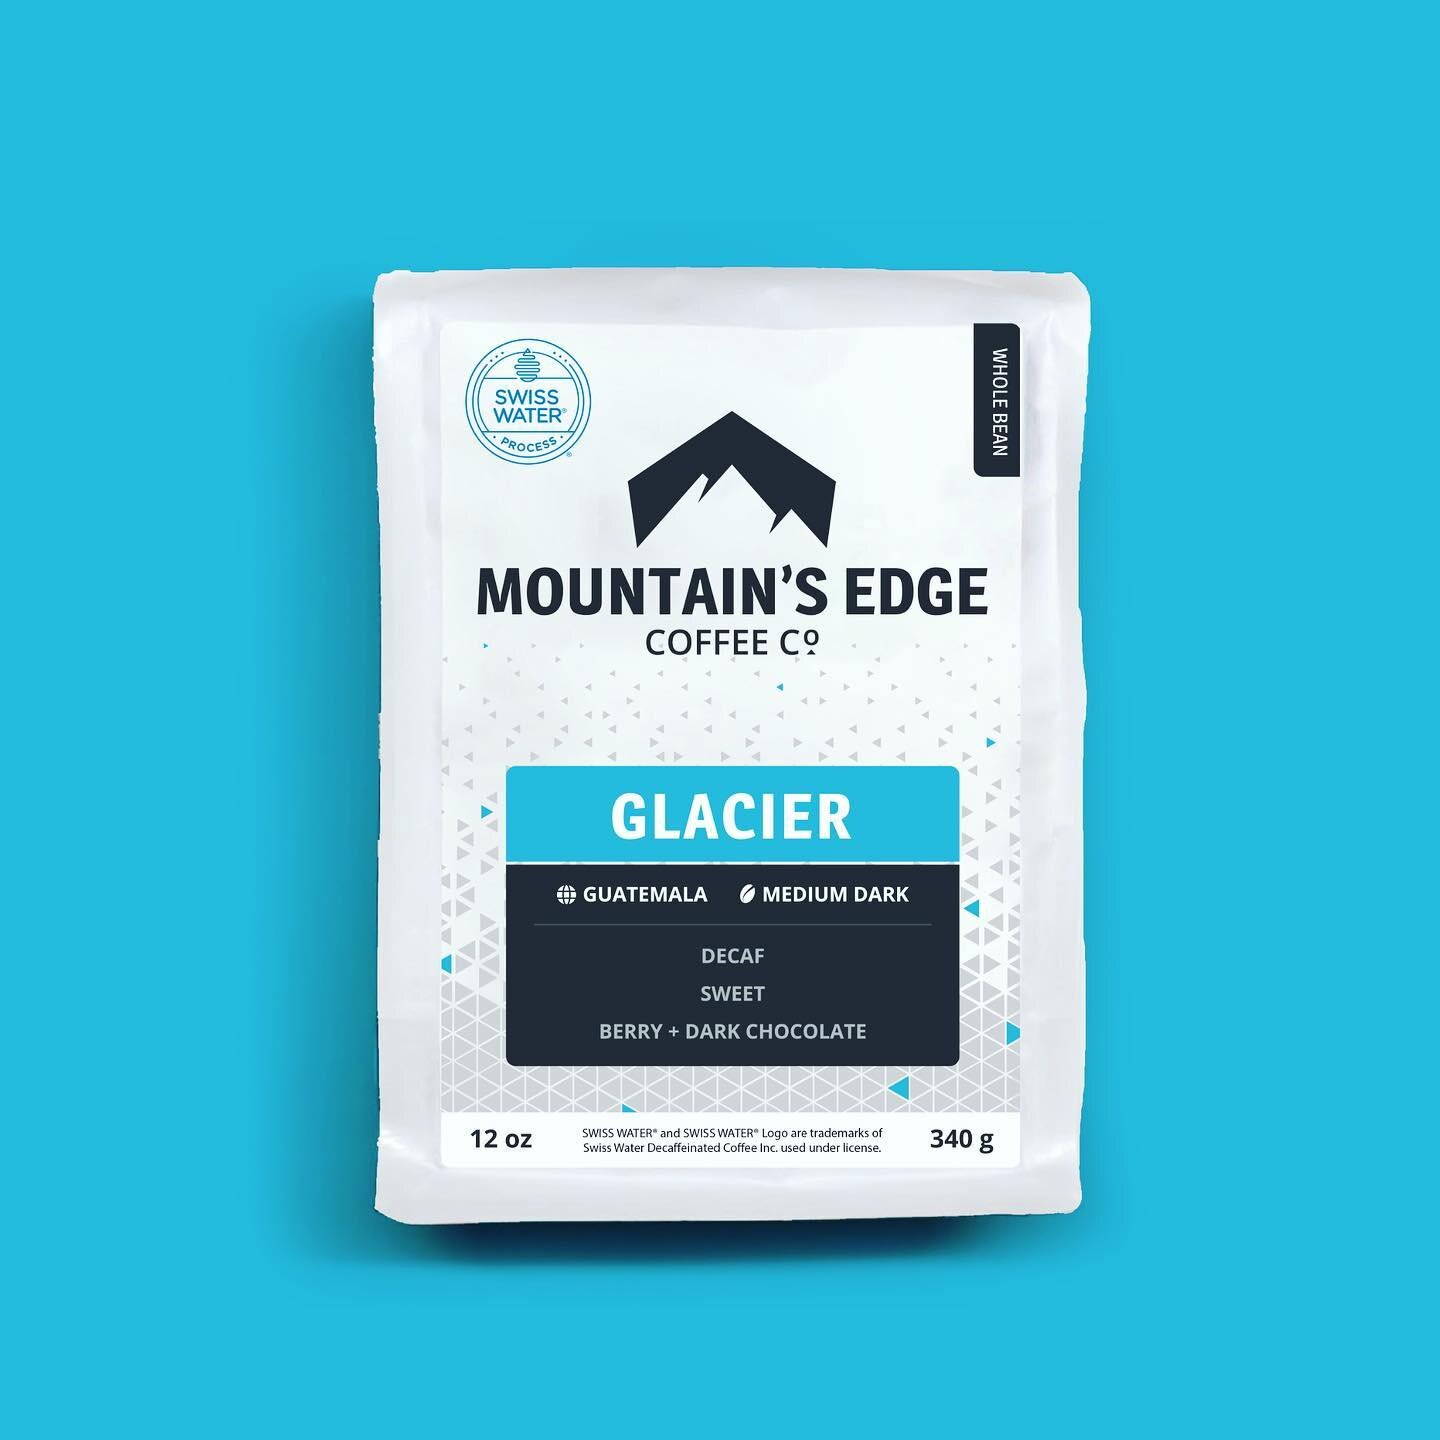 Because coffee is delicious all day&hellip;

Introducing GLACIER DECAF to our line up! 

Enjoy notes of dark chocolate and berry sweetness in this medium dark coffee. Glacier Decaf has all the flavour without the caffeine. 

Available now on our webs